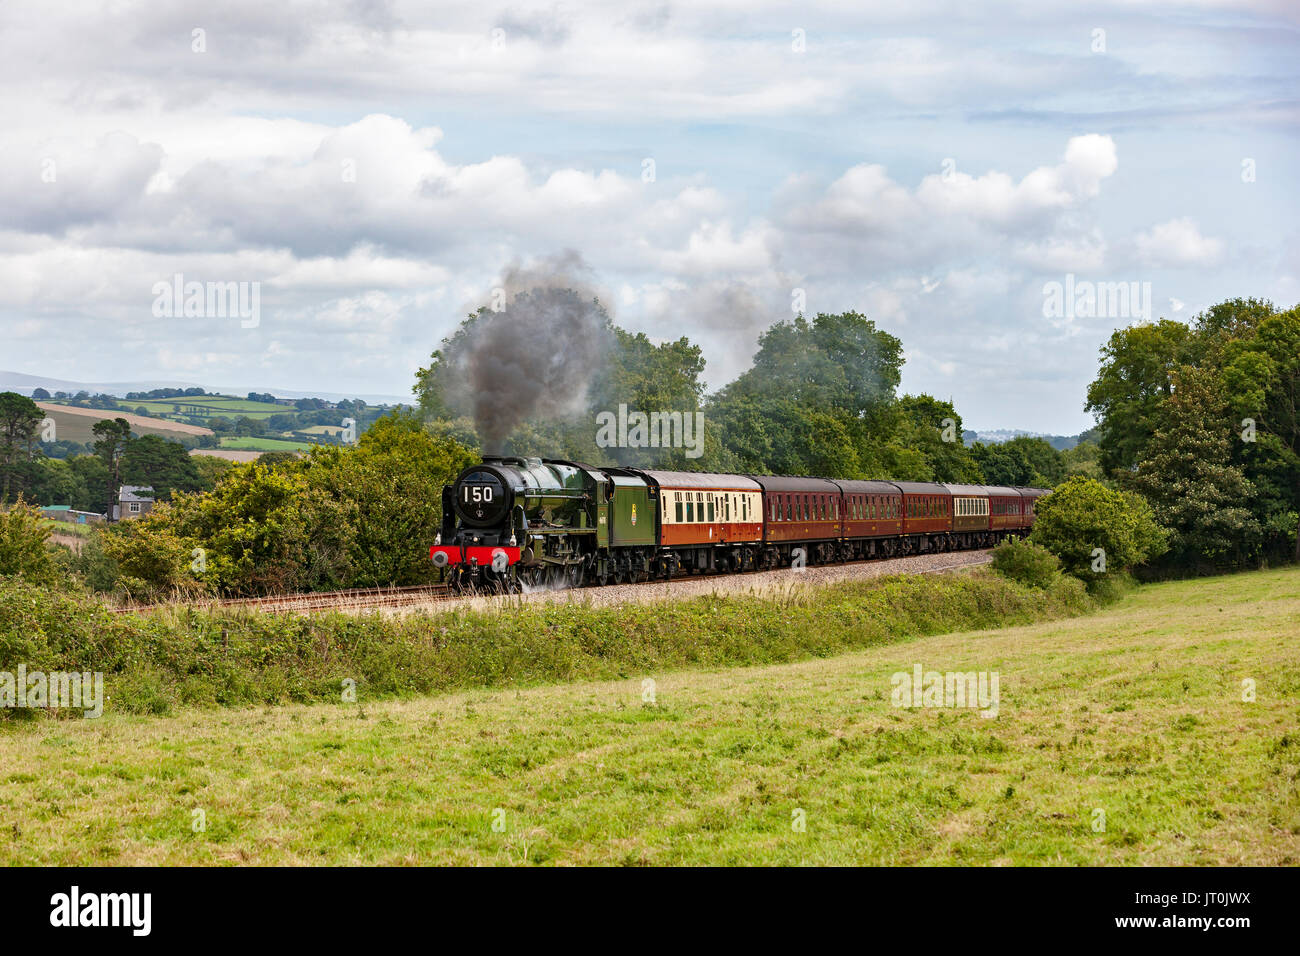 Cornwall, UK. 6th Aug, 2017. The Royal Duchy Steaming Up St Germans Bank. Royal Scot Class 46100 On a bright sunny day in the Cornish Countryside. Steam Tour from Bristol To Par on a day excursion. Credit: Barry Bateman/Alamy Live News Stock Photo